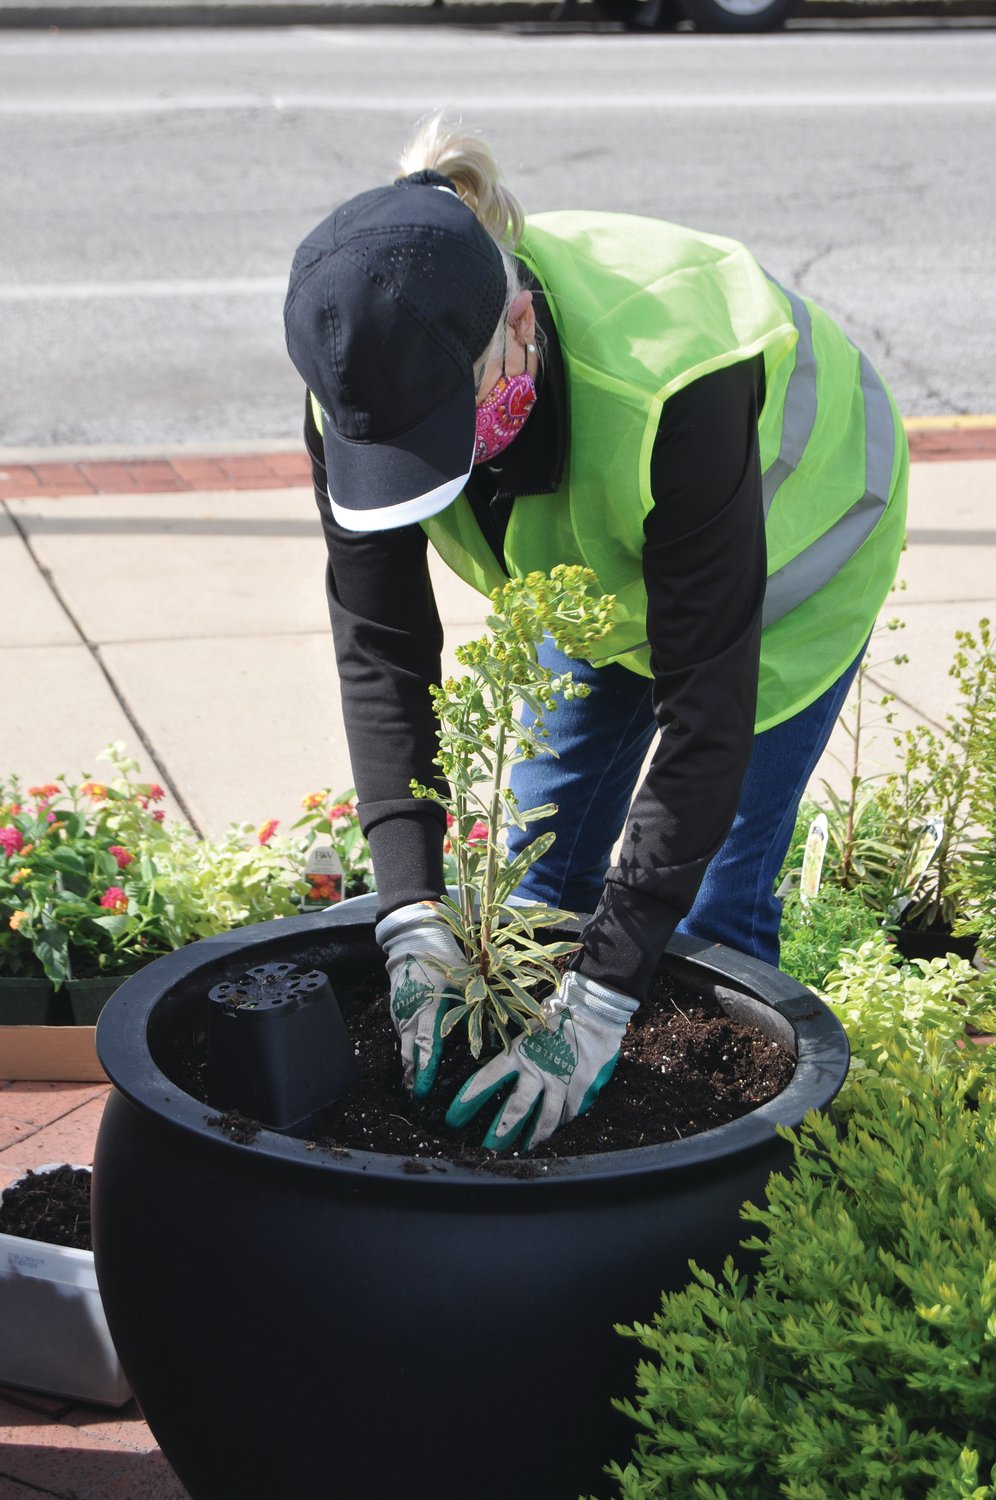 Belinda Kiger arranges a plant in a planter Monday at Marie Canine Plaza. Crawfordsville Main Street members planted flowers in the plaza.